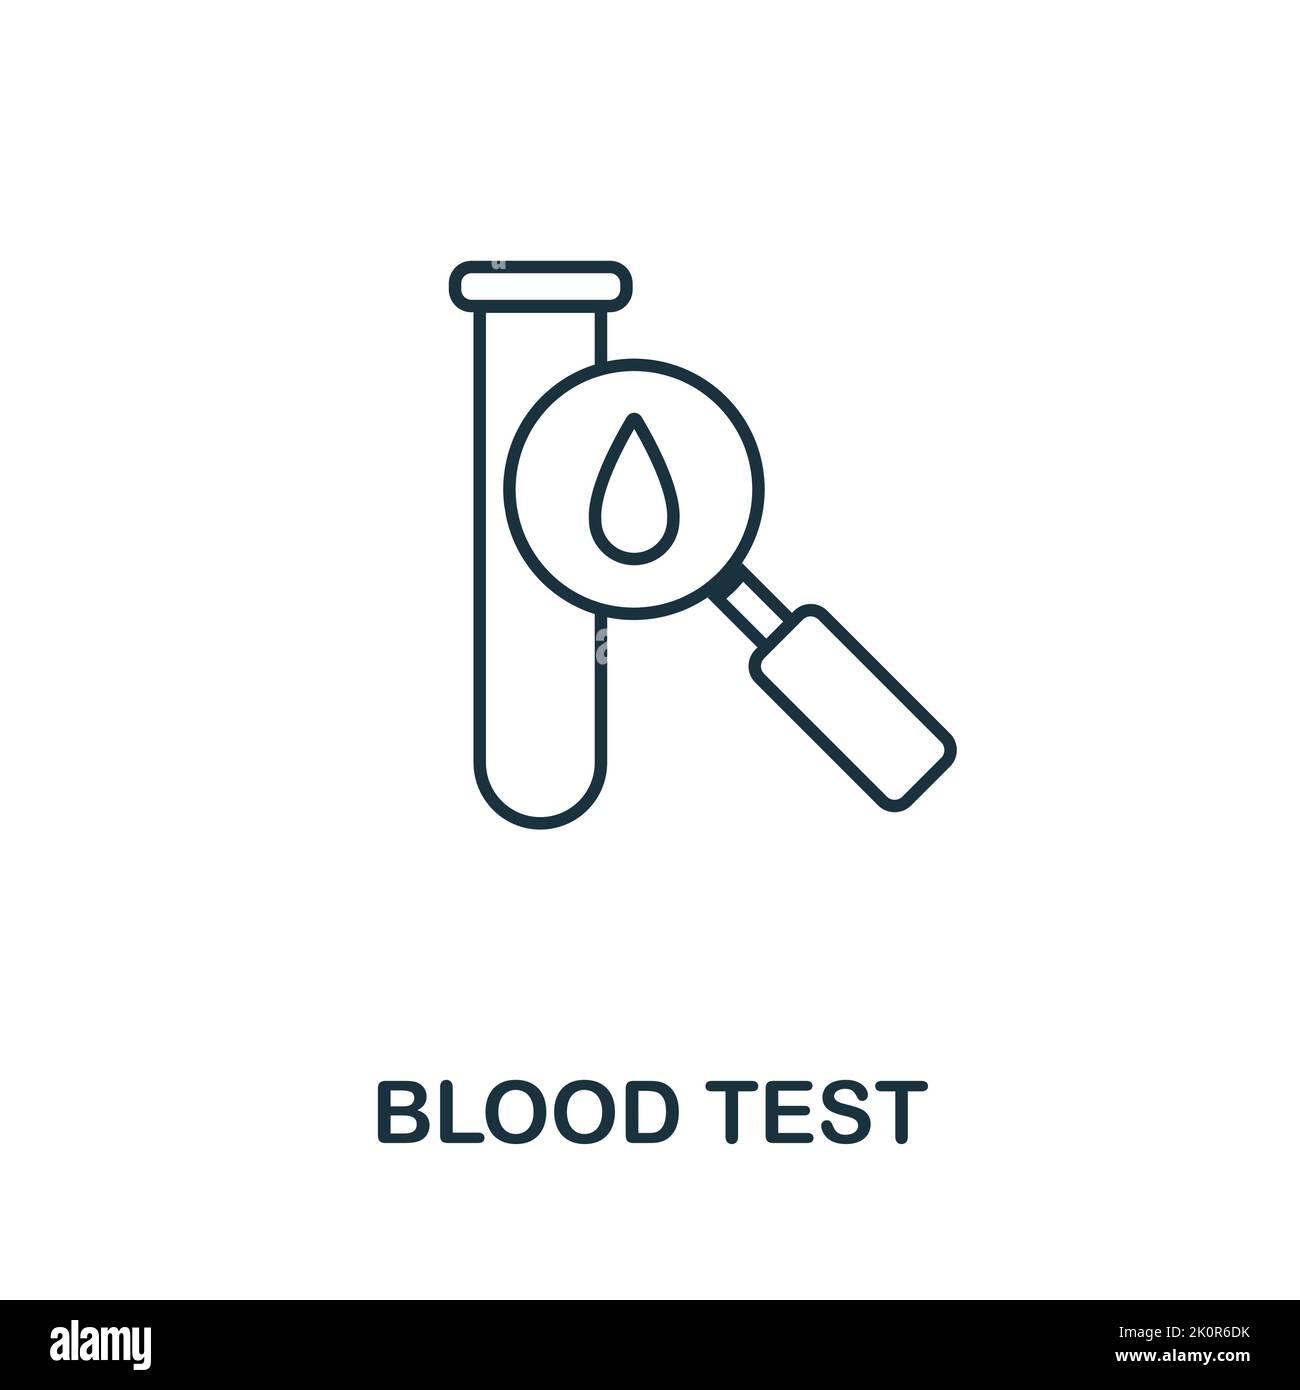 Blood Test icon. Monocrome element from medical services collection. Blood Test icon for banners, infographics and templates. Stock Vector